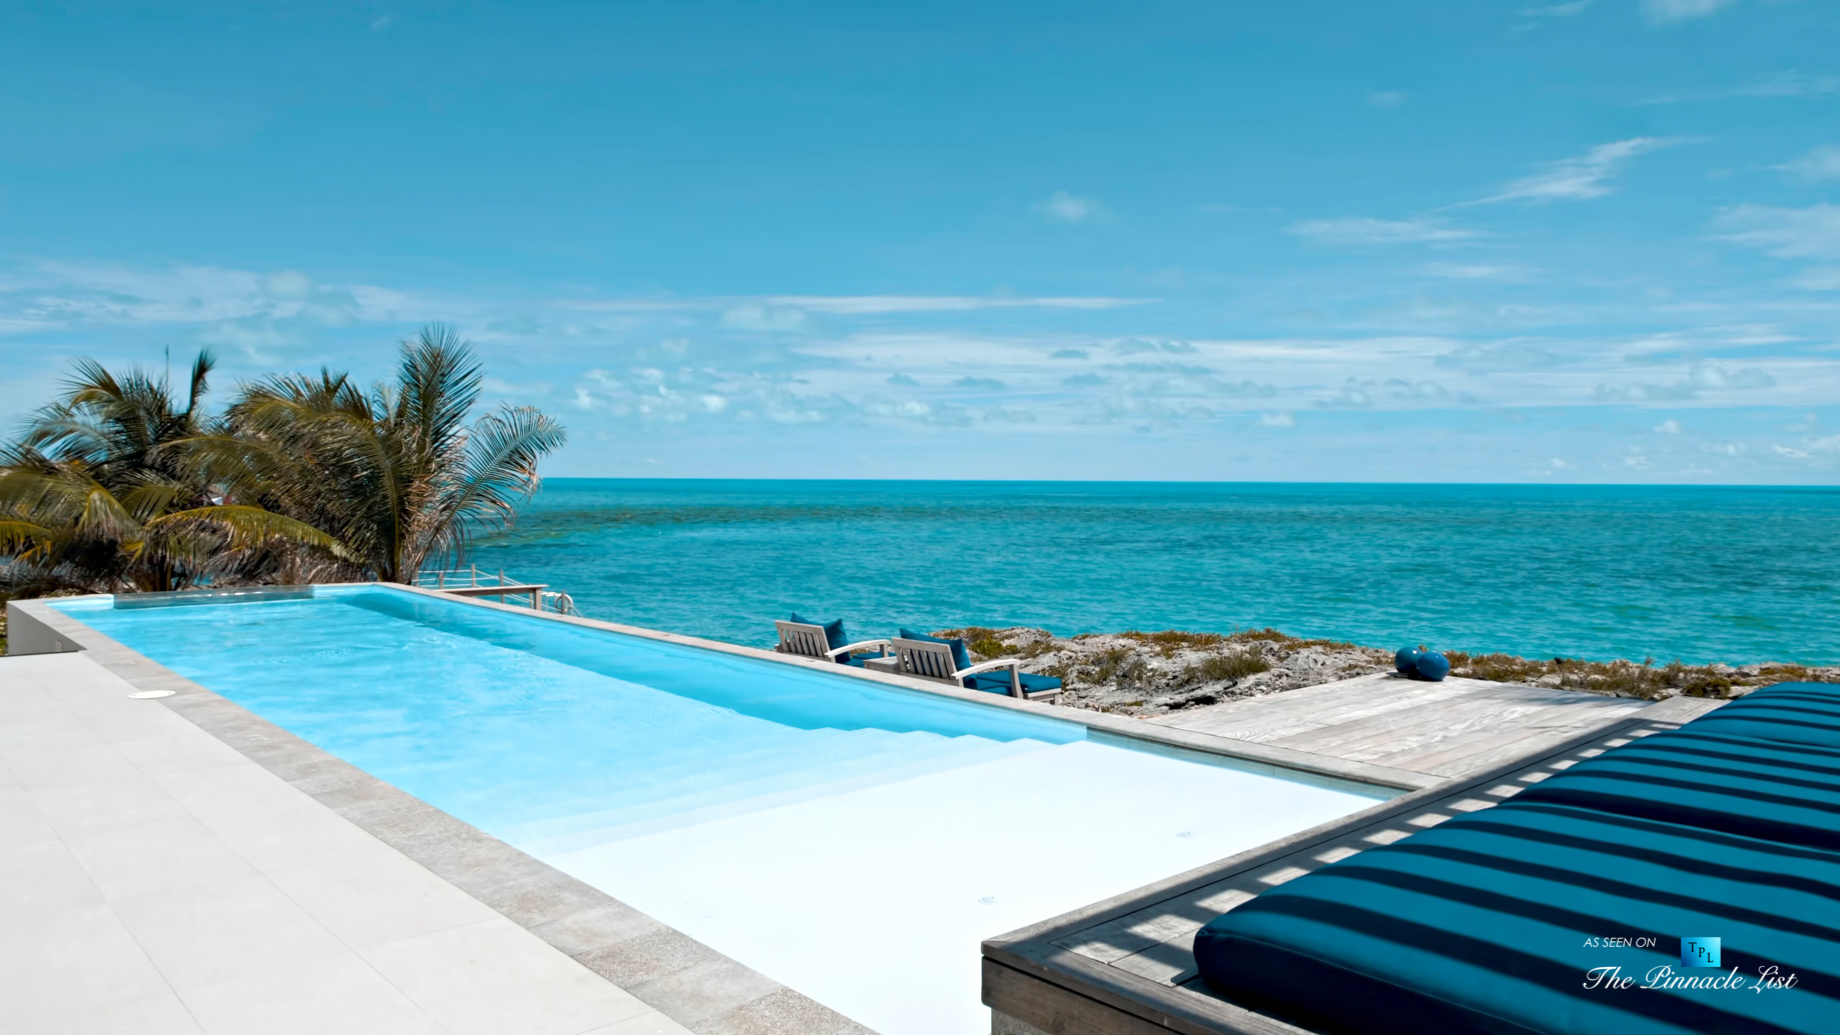 Tip of the Tail Villa - Providenciales, Turks and Caicos Islands - Infinity Pool View - Luxury Real Estate - South Shore Peninsula Home